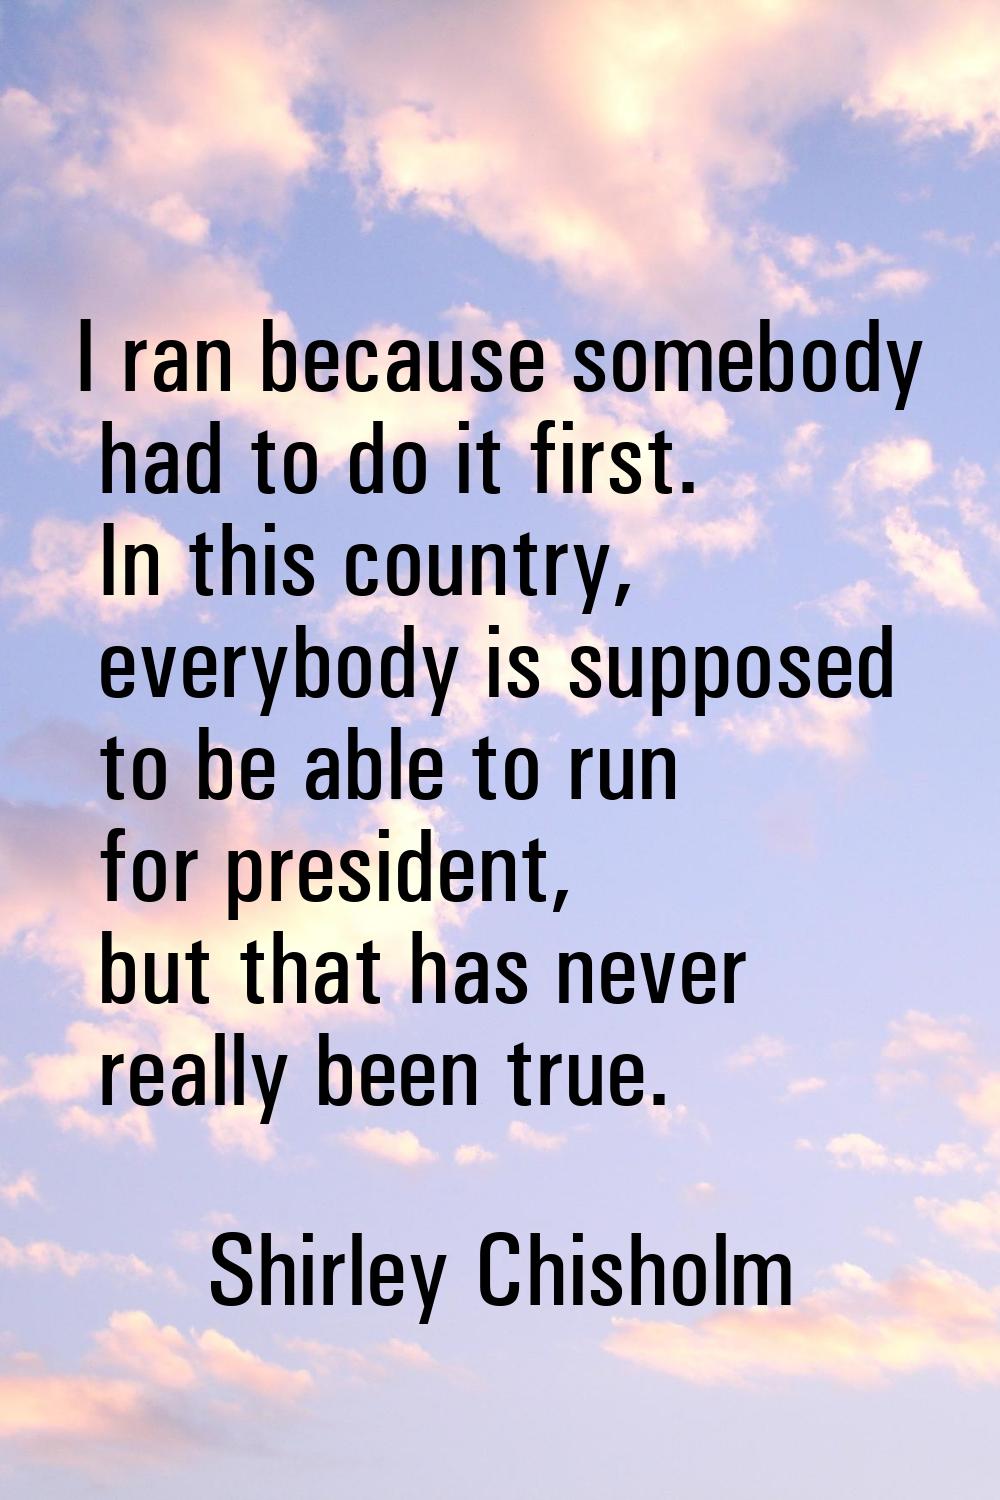 I ran because somebody had to do it first. In this country, everybody is supposed to be able to run